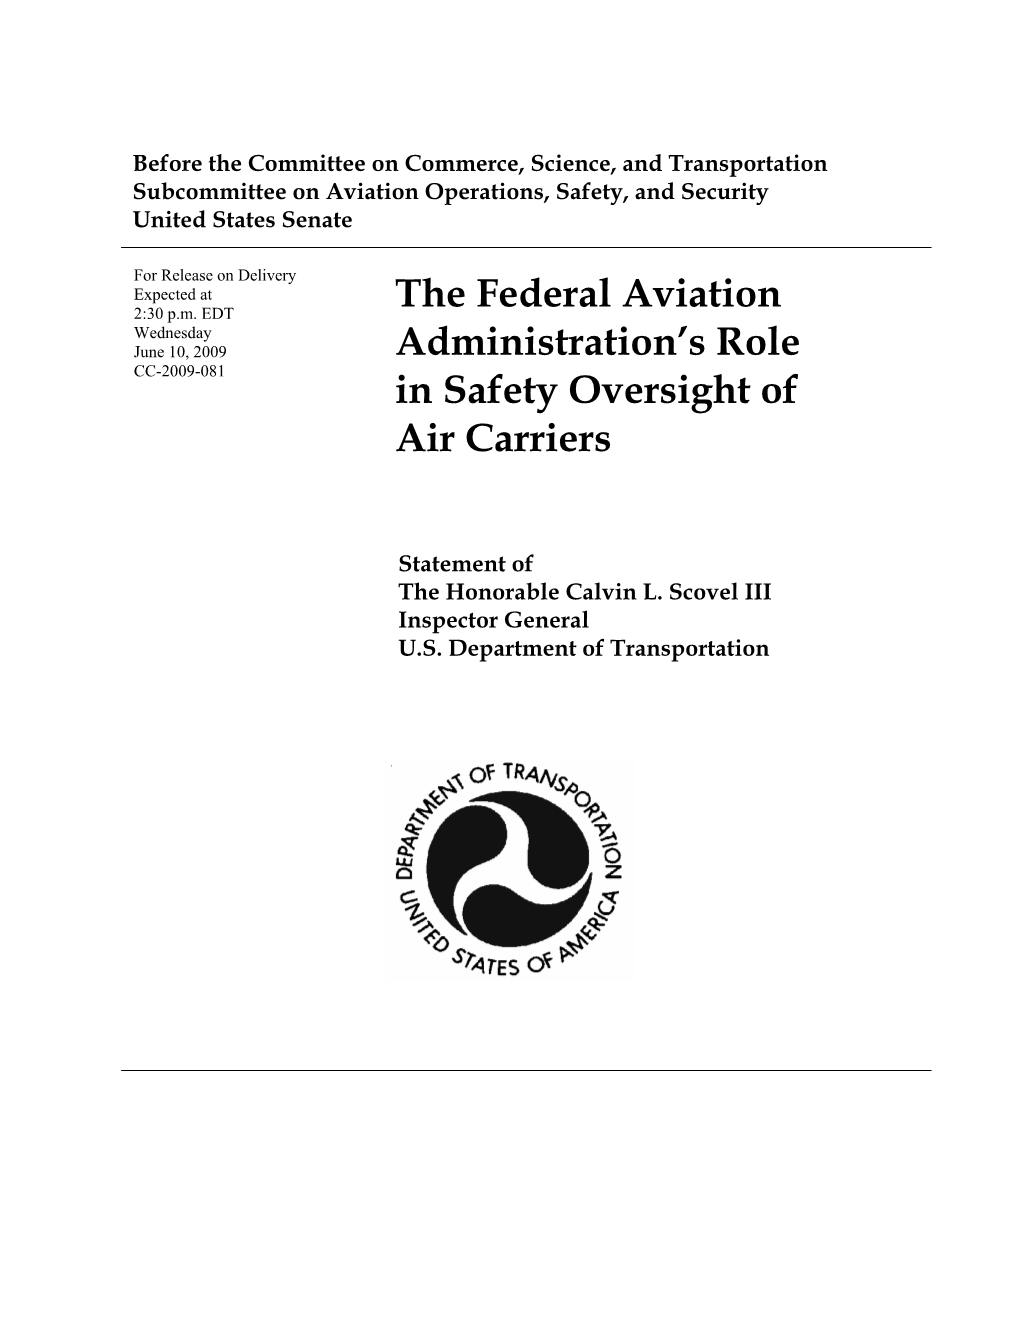 The Federal Aviation Administration's Role in Safety Oversight of Air